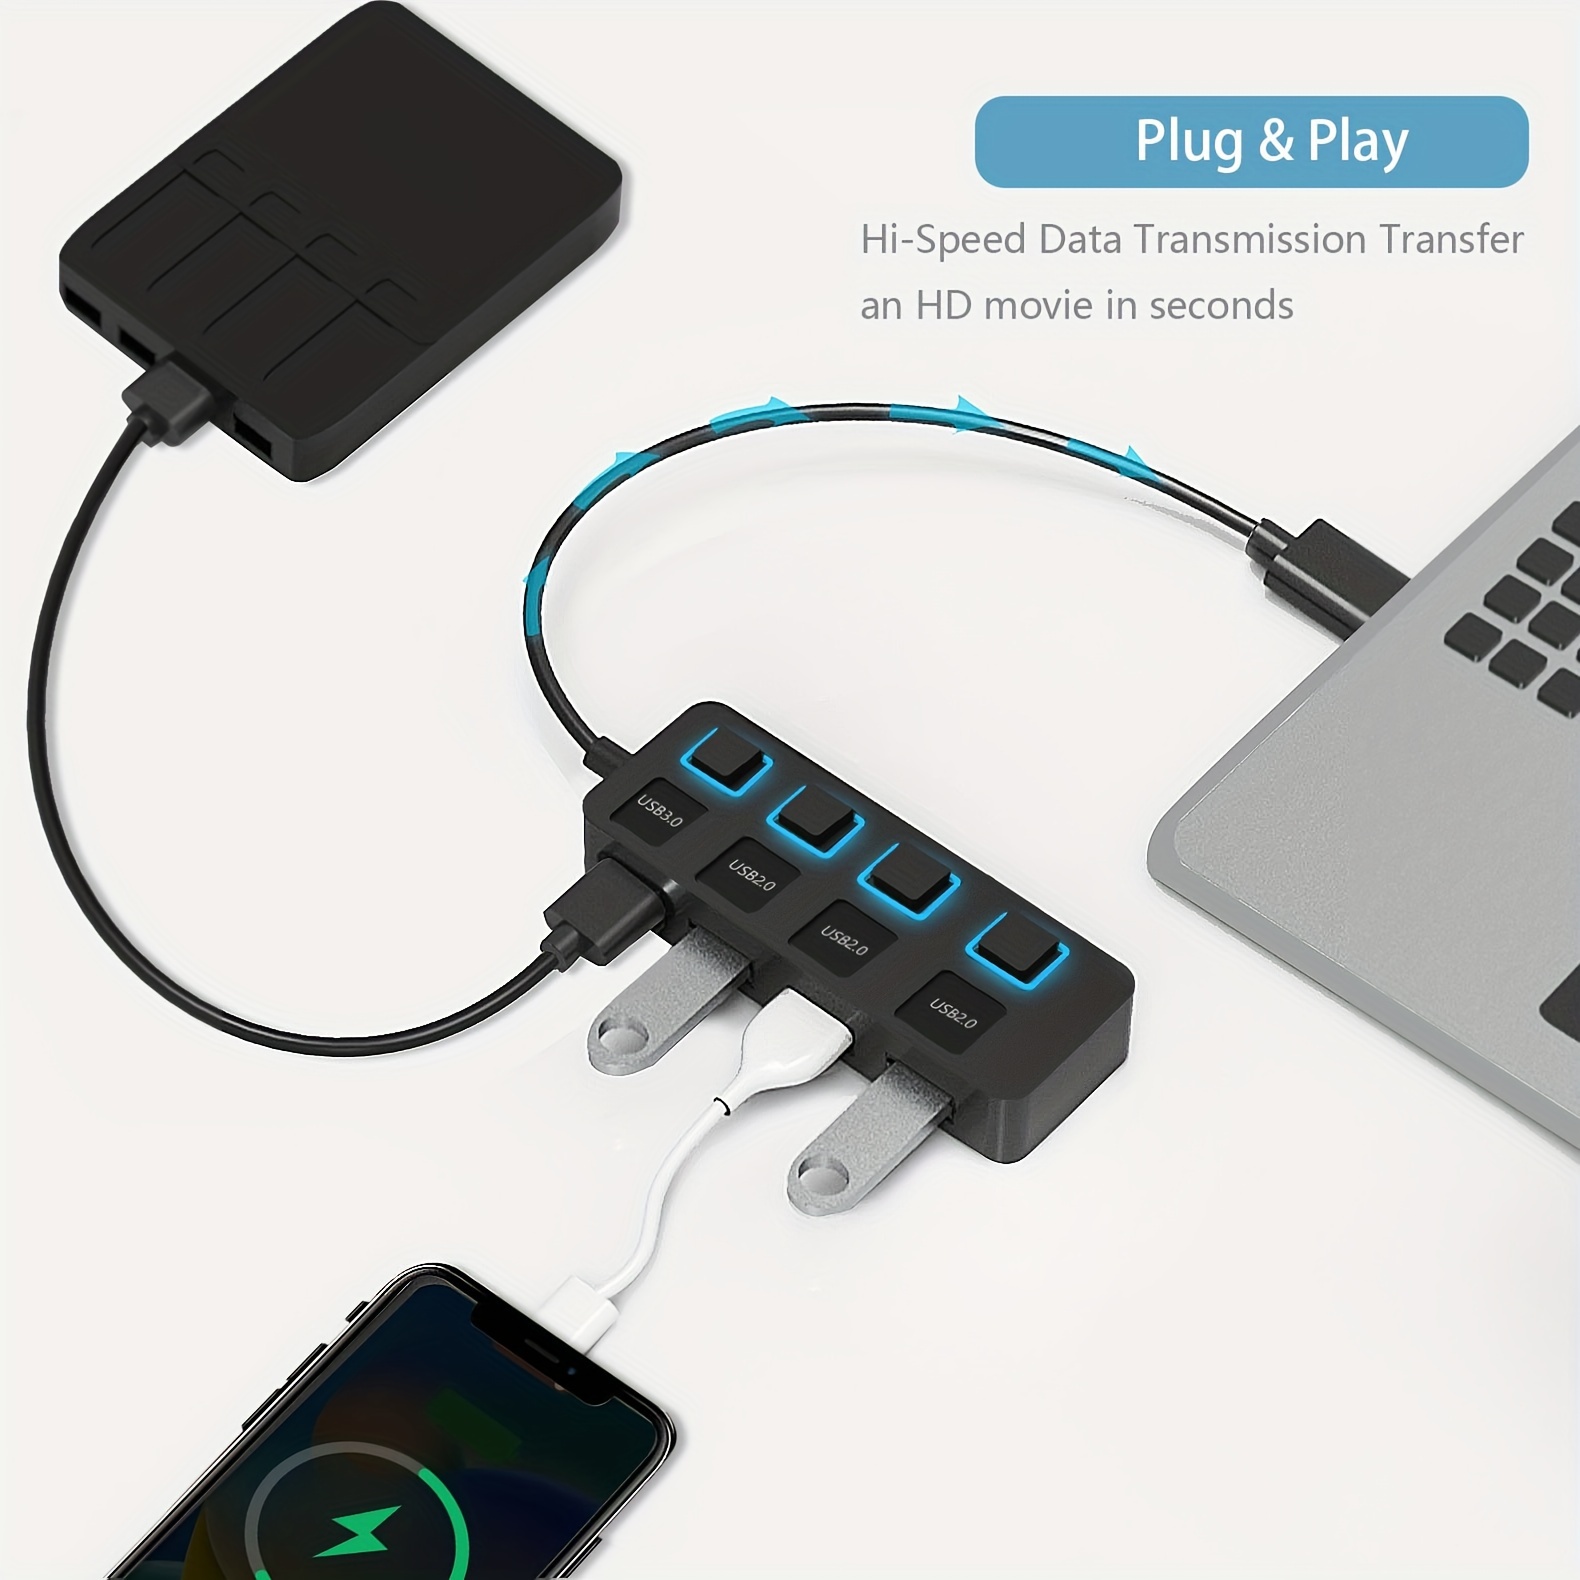 4-Way USB 2.0 Sharing Switch - Sabrent